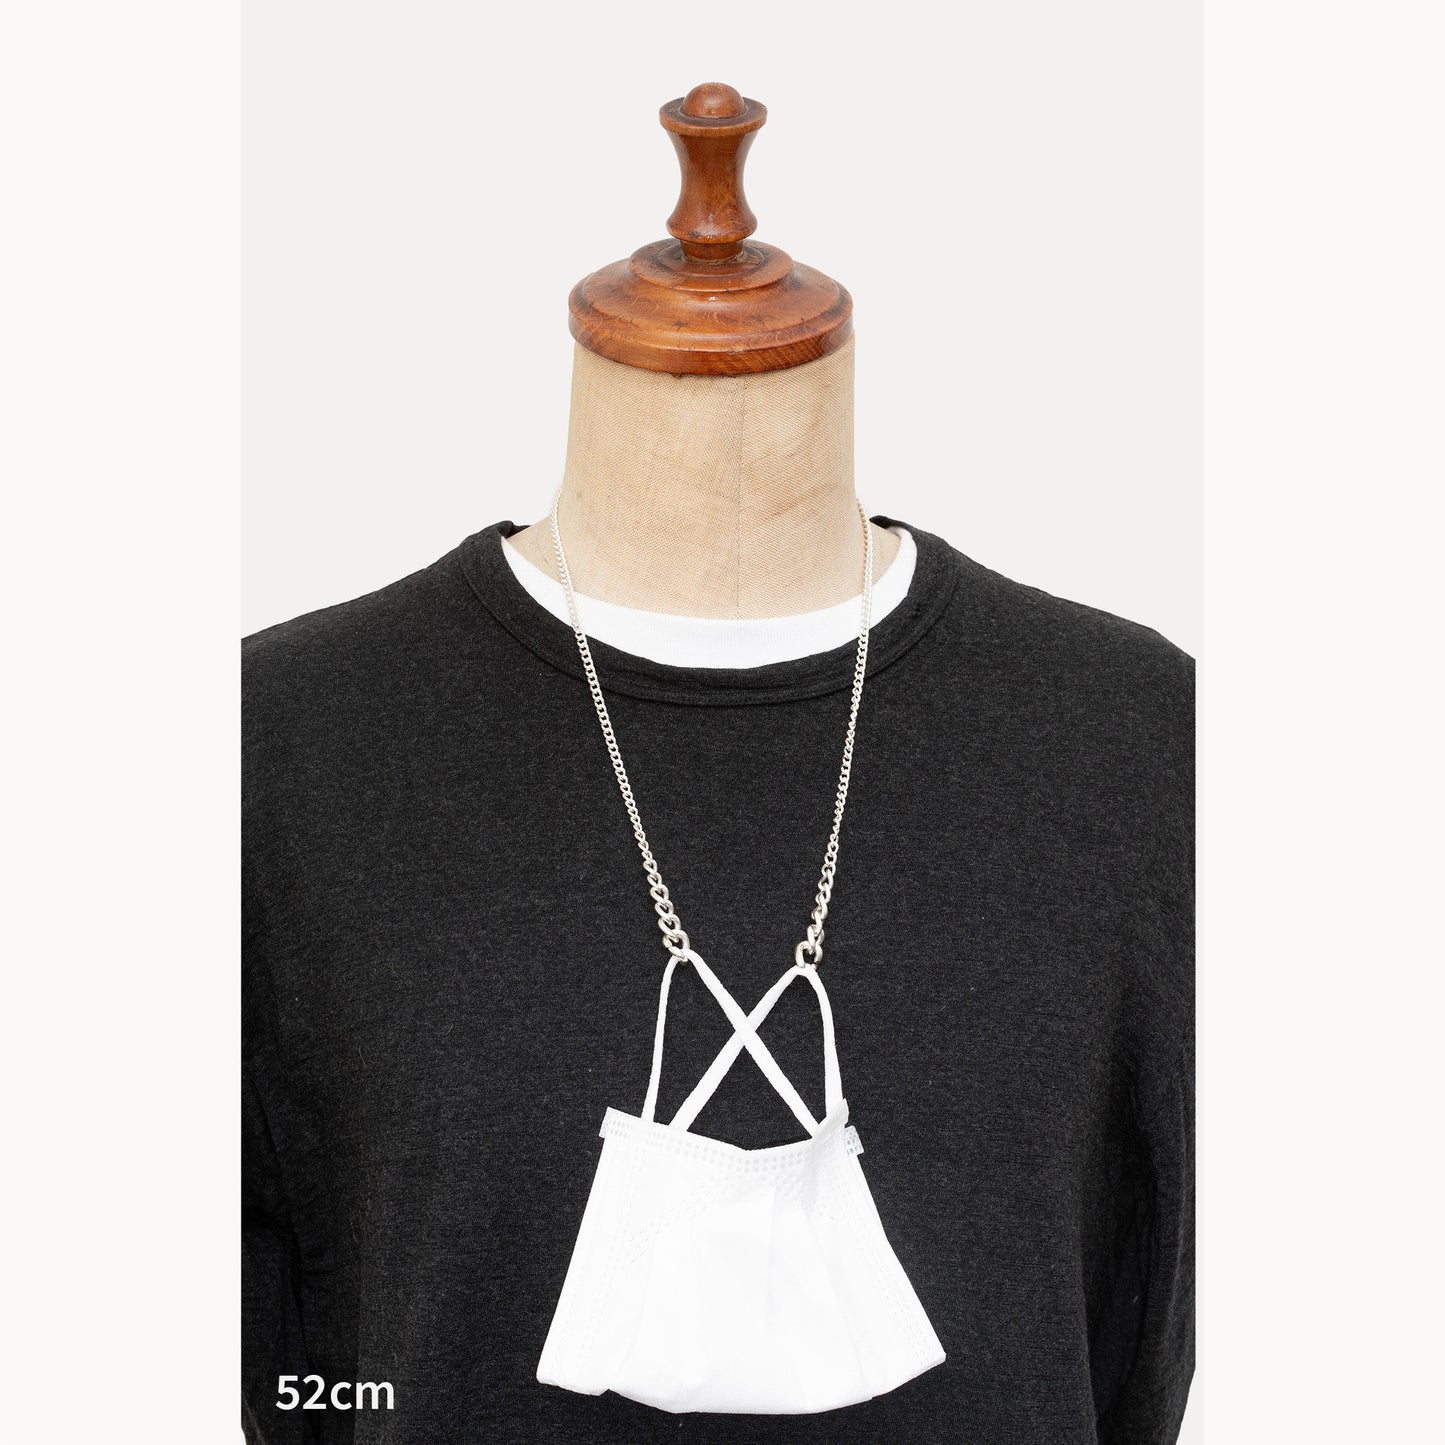 Mask Chain Necklace | 1802N051020